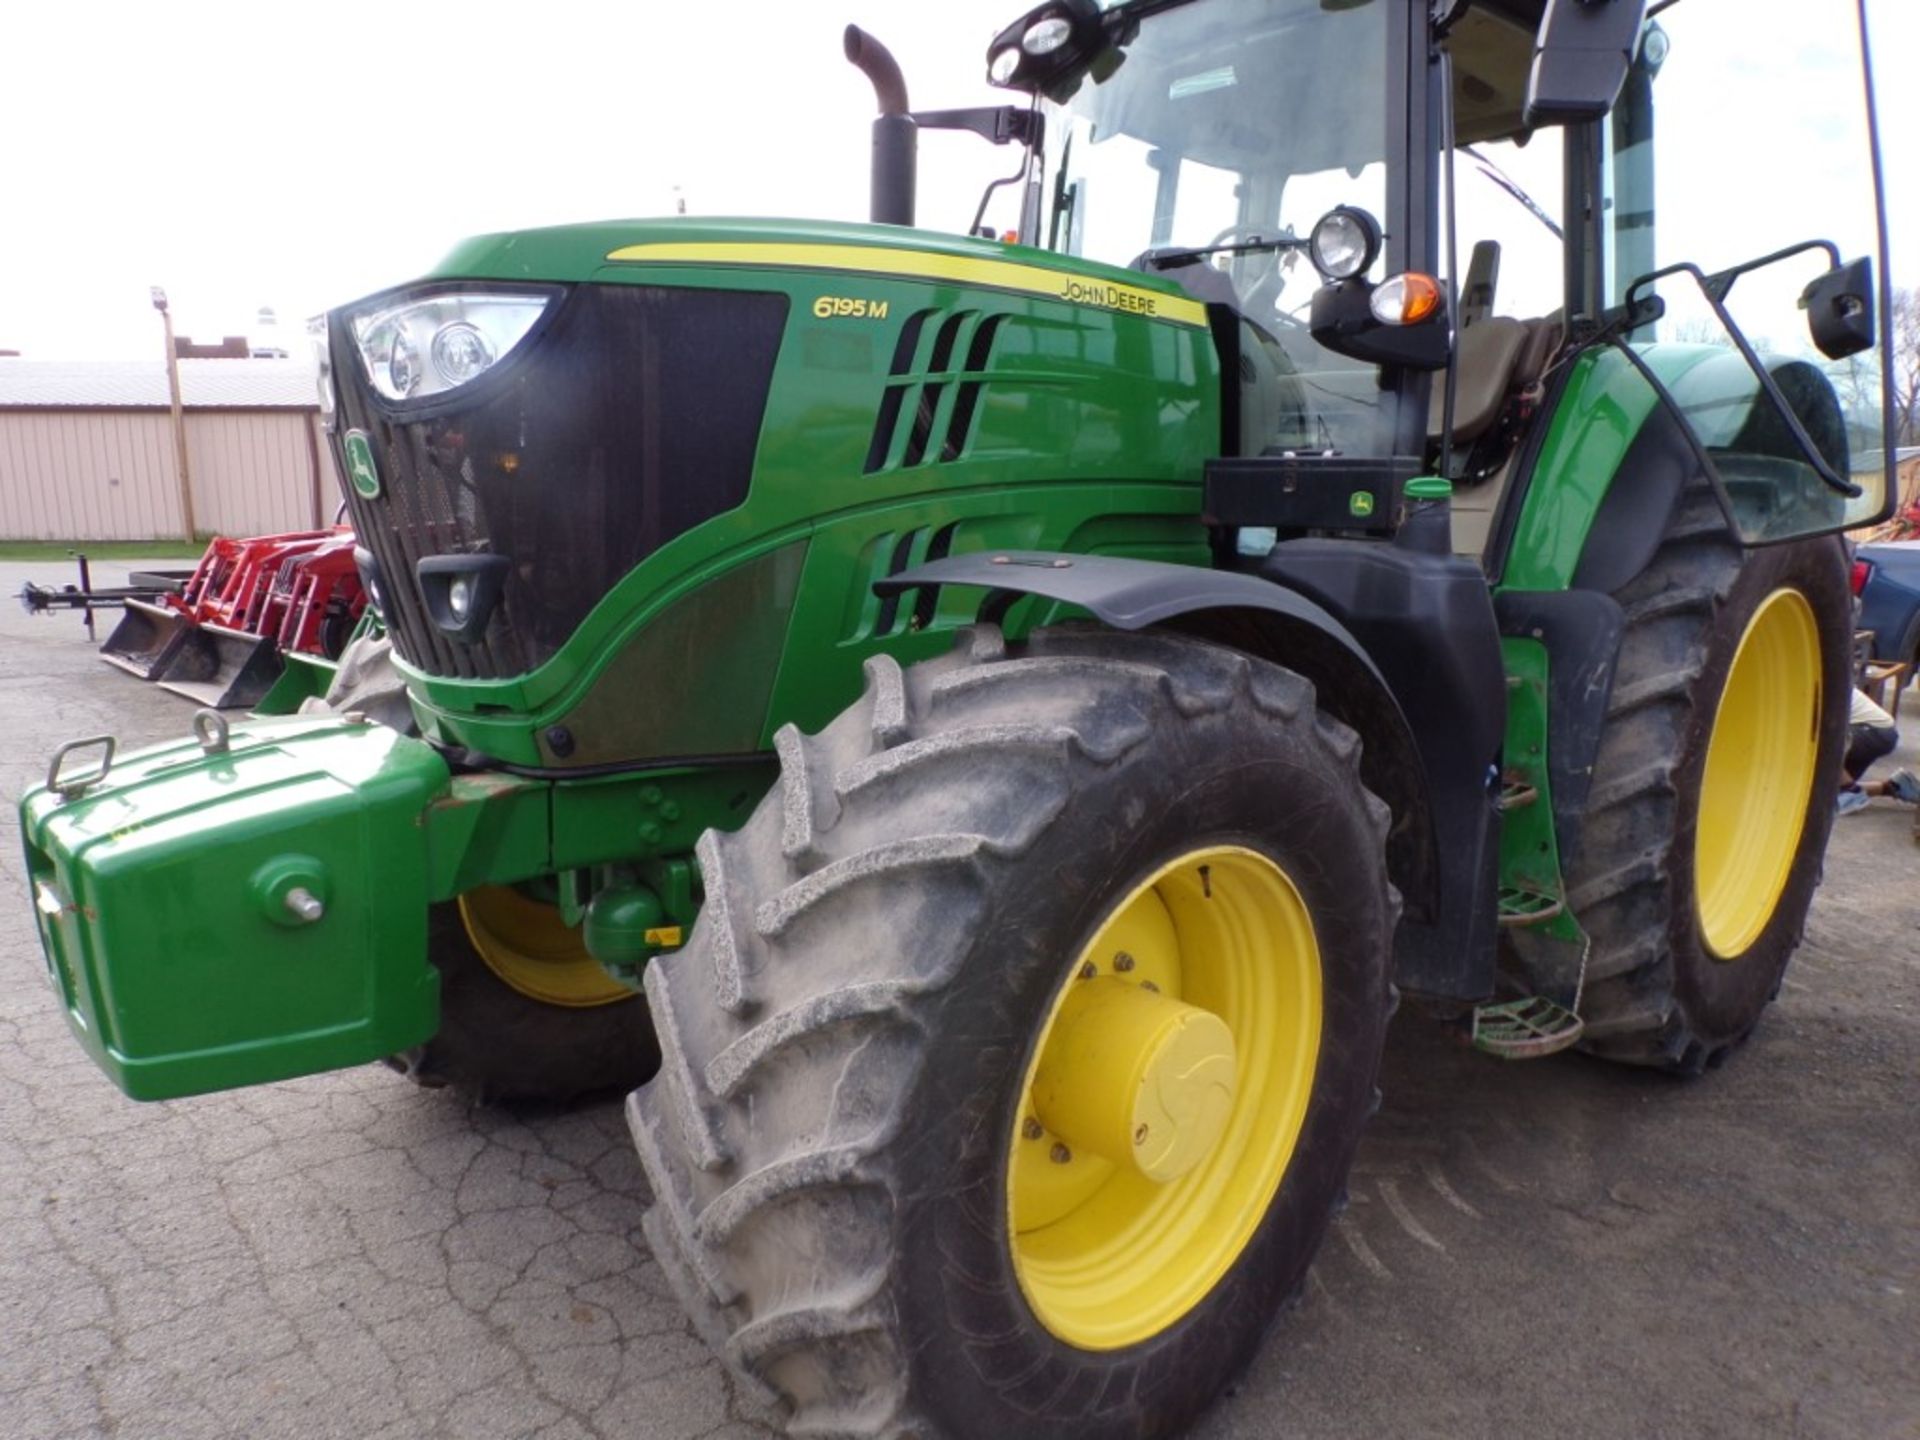 2021 John Deere 6195M, 4 WD Tractor, Power Shift Tans w/Screen, Rear Hyd. Remotes, Air Brake Hookup, - Image 3 of 8